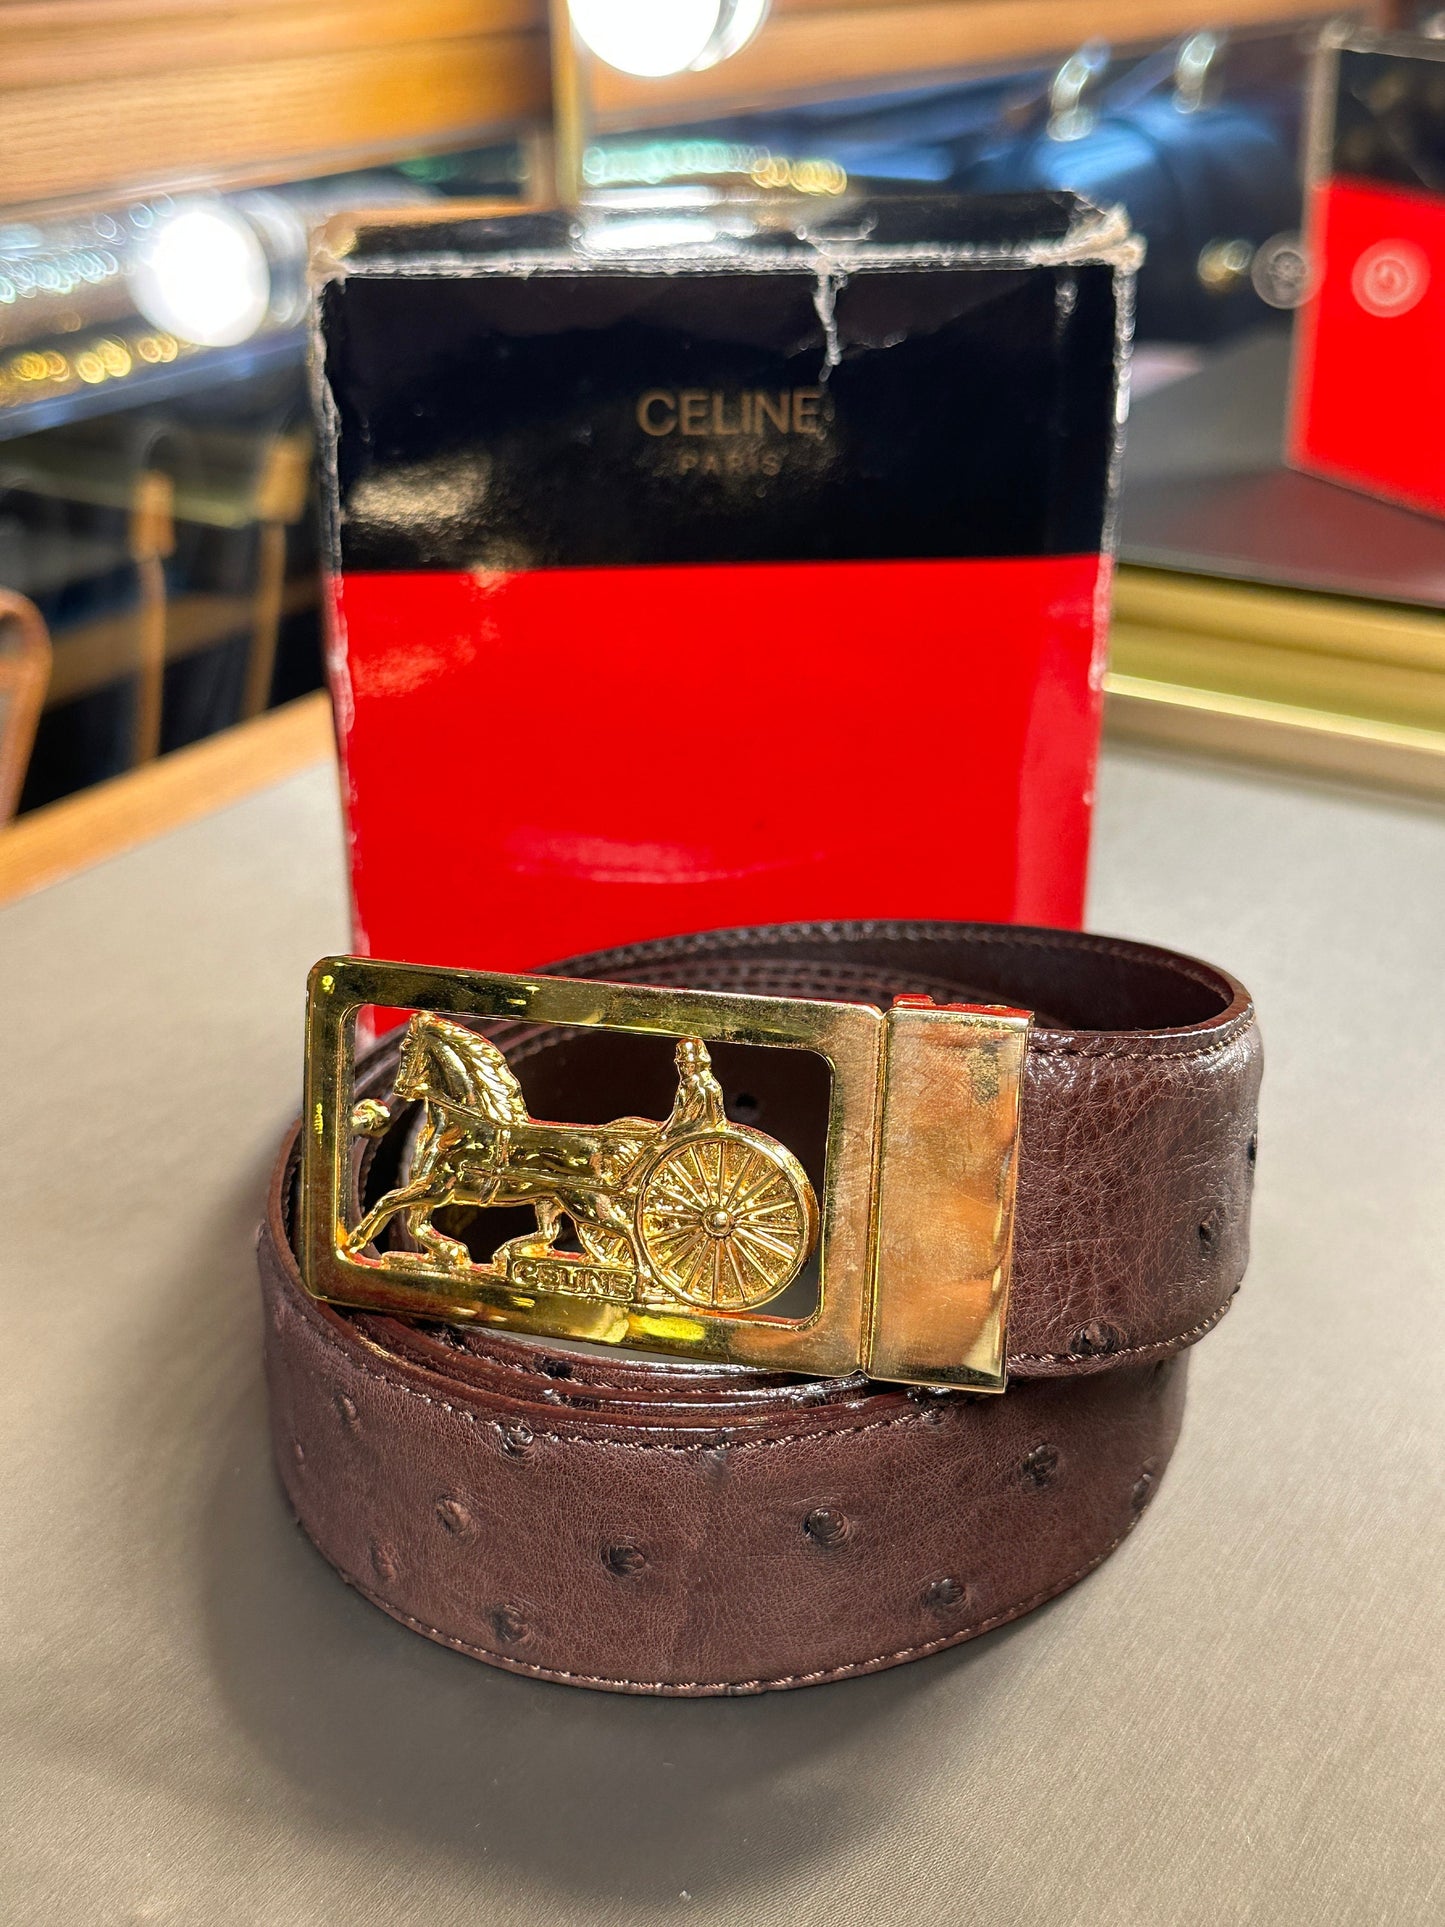 CELINE VINTAGE, 100% Authentic Genuine Ostrich Leather Carriage Buckle Waist Belt, Brown, Great Condition with Original Box, Made In Italy